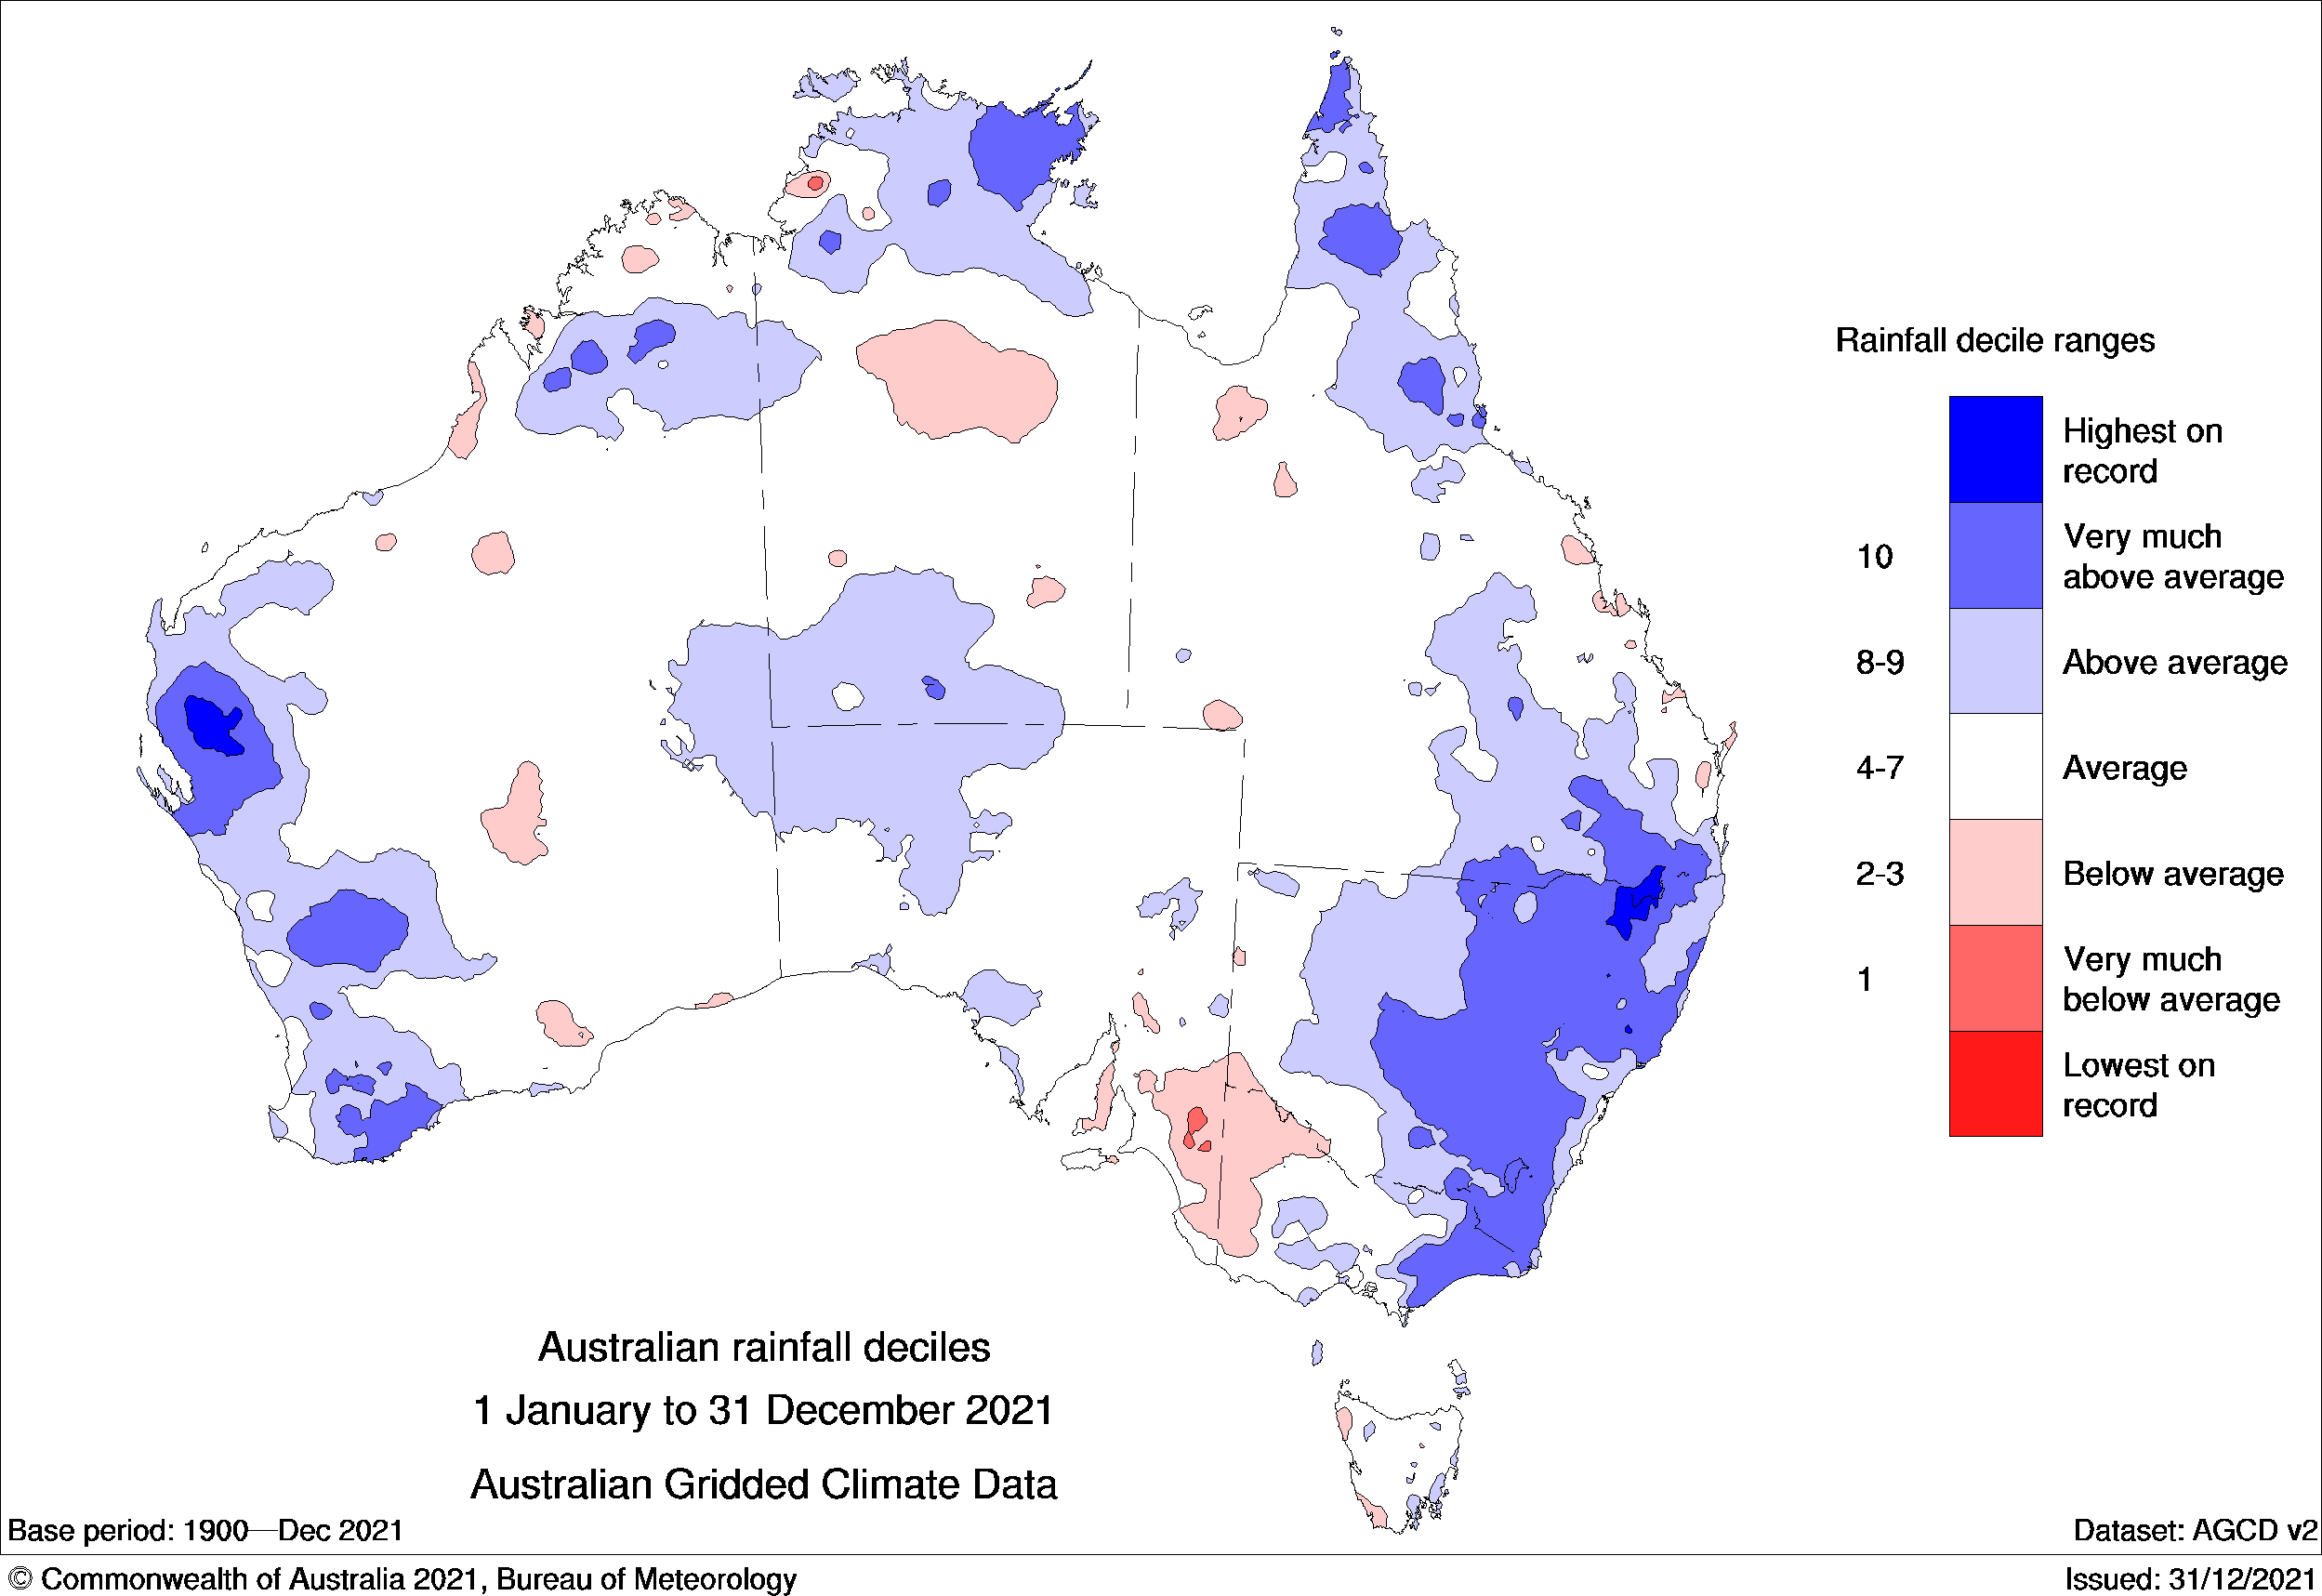 Map of Aus, blue south east and south west indicating above average rainfall in 2021